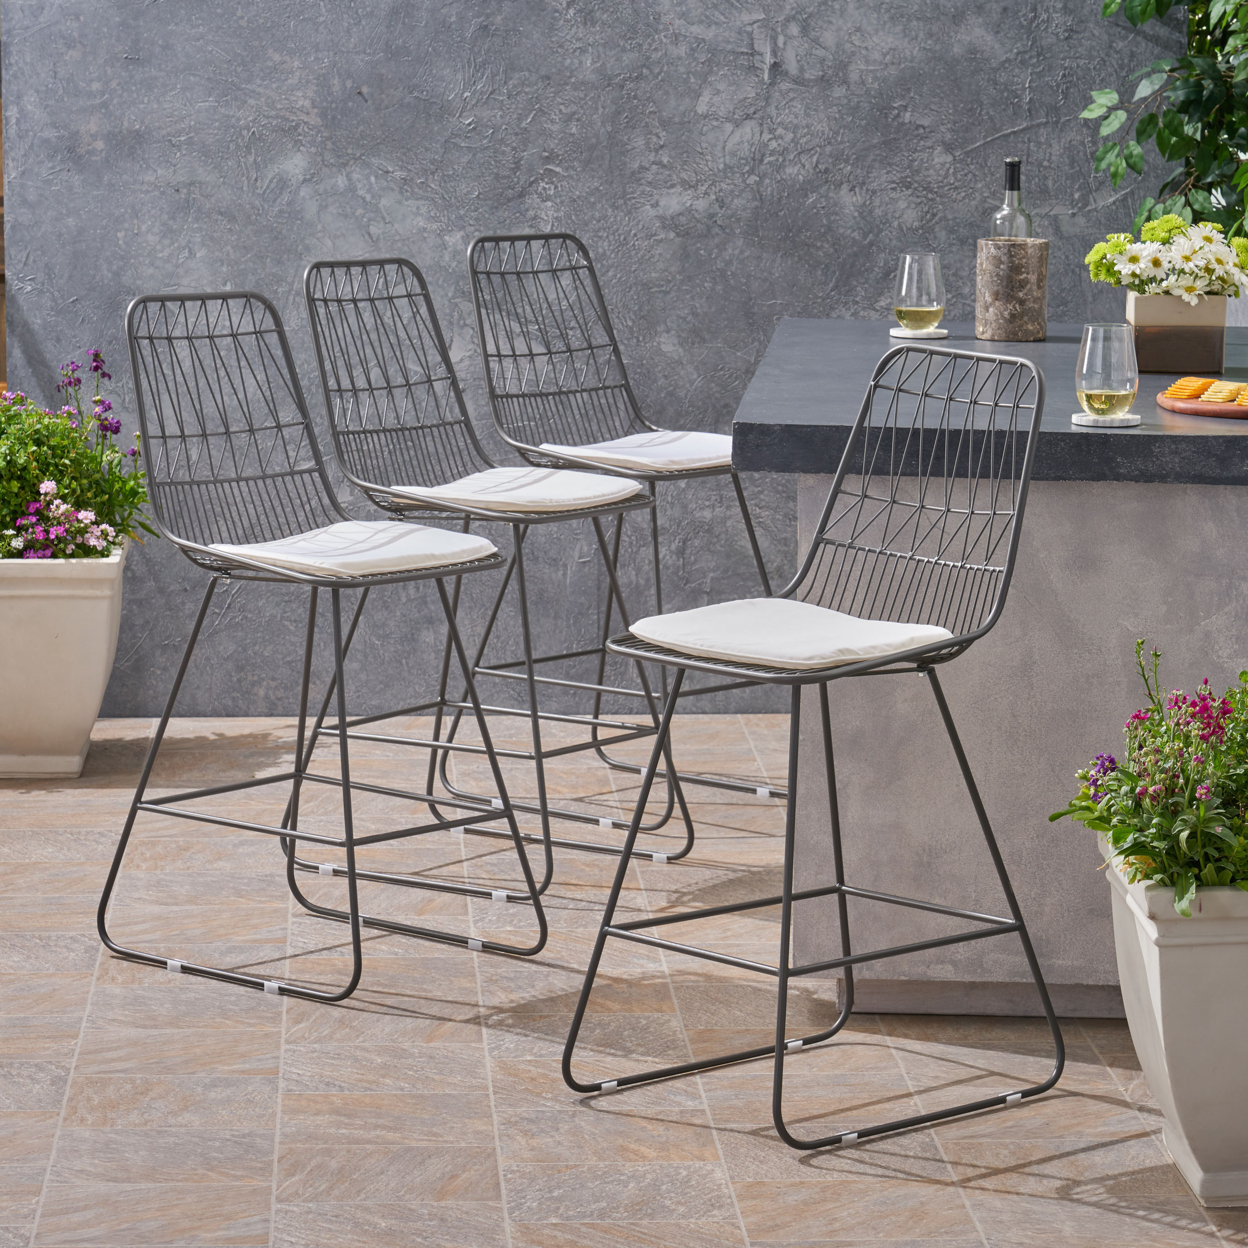 Hedy Outdoor 26 Seats Iron Counter Stools With Cushions (Set Of 4) - Gray